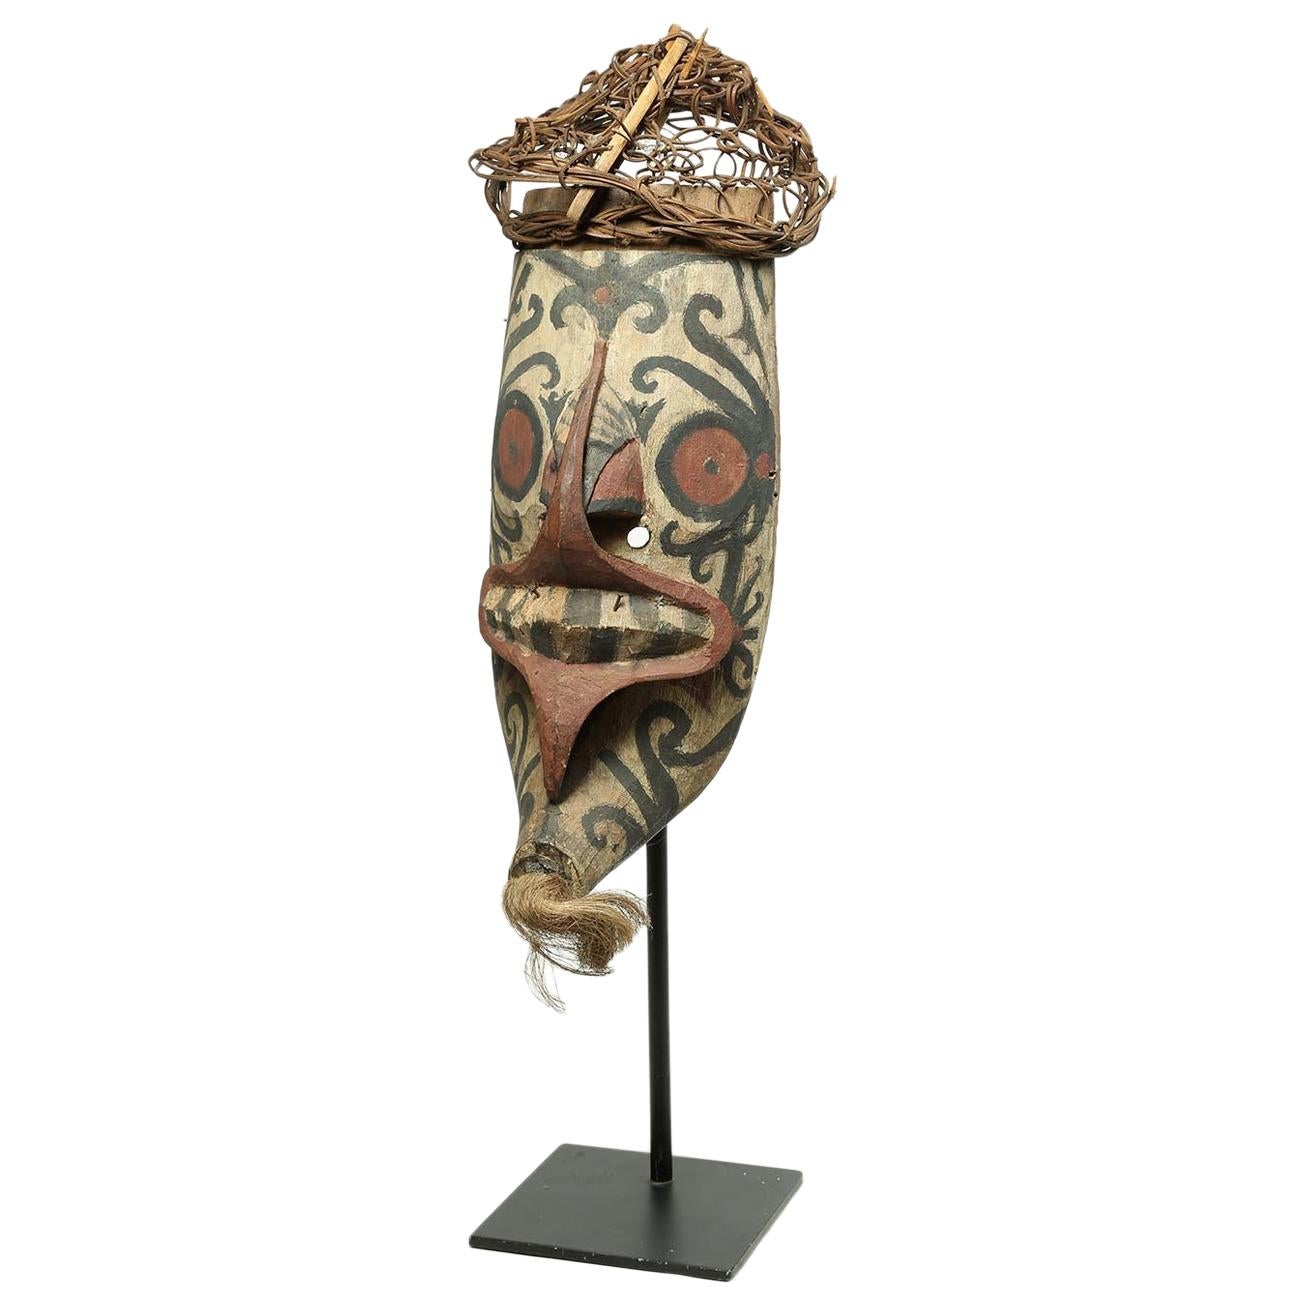 Tribal Wood and Pigment Dayak Hudoq Mask on Stand, Early 20th Century Borneo